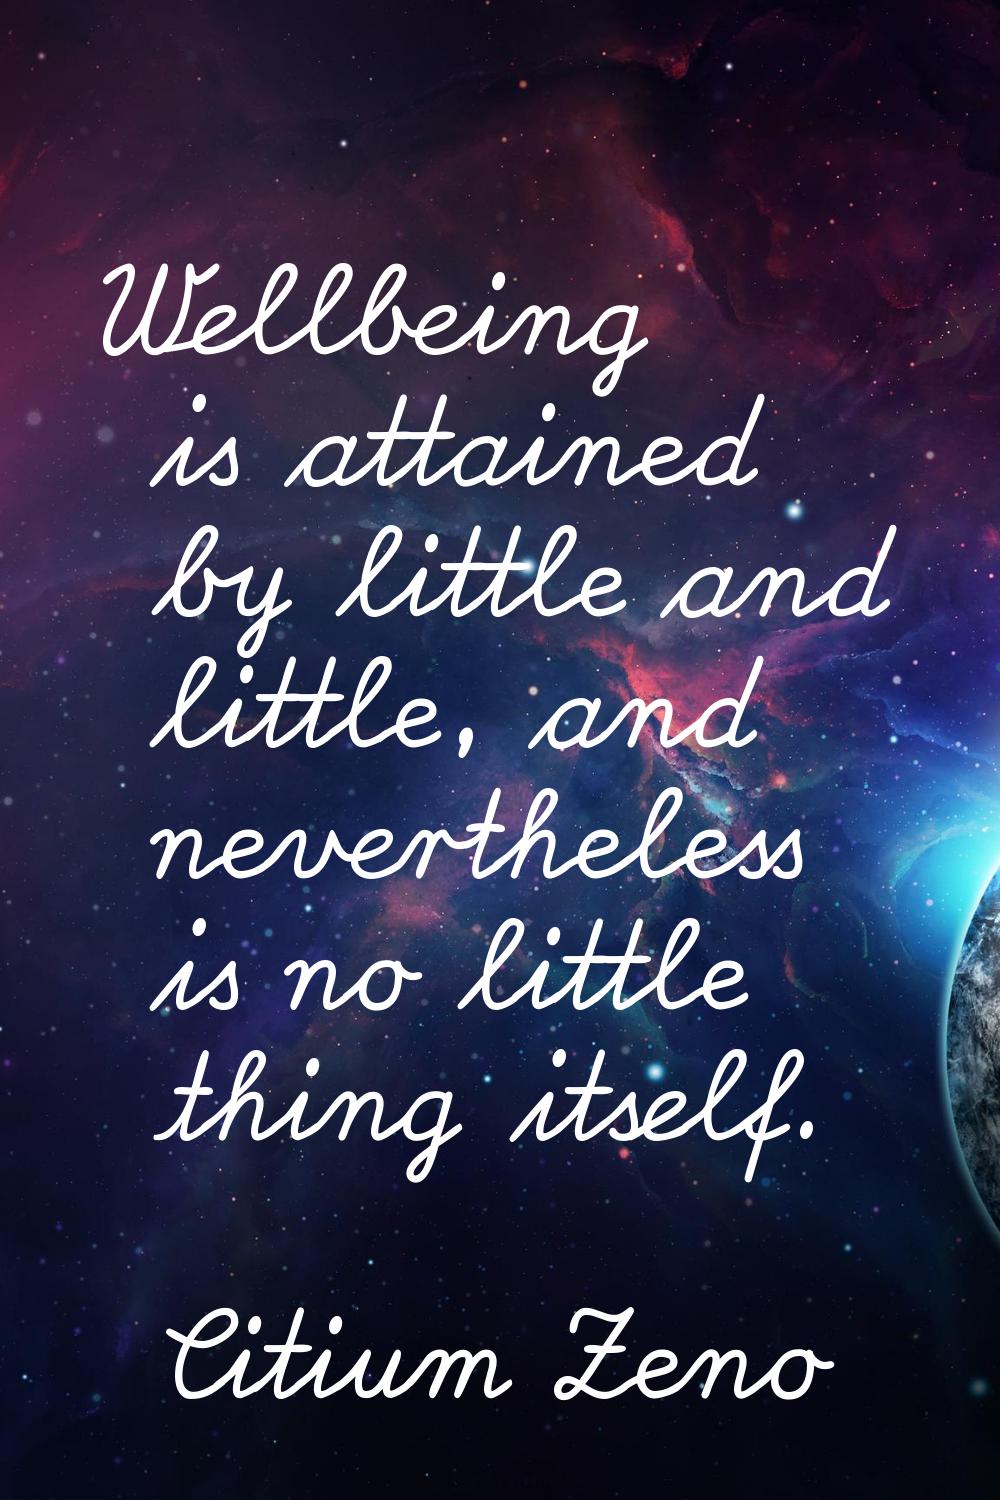 Wellbeing is attained by little and little, and nevertheless is no little thing itself.